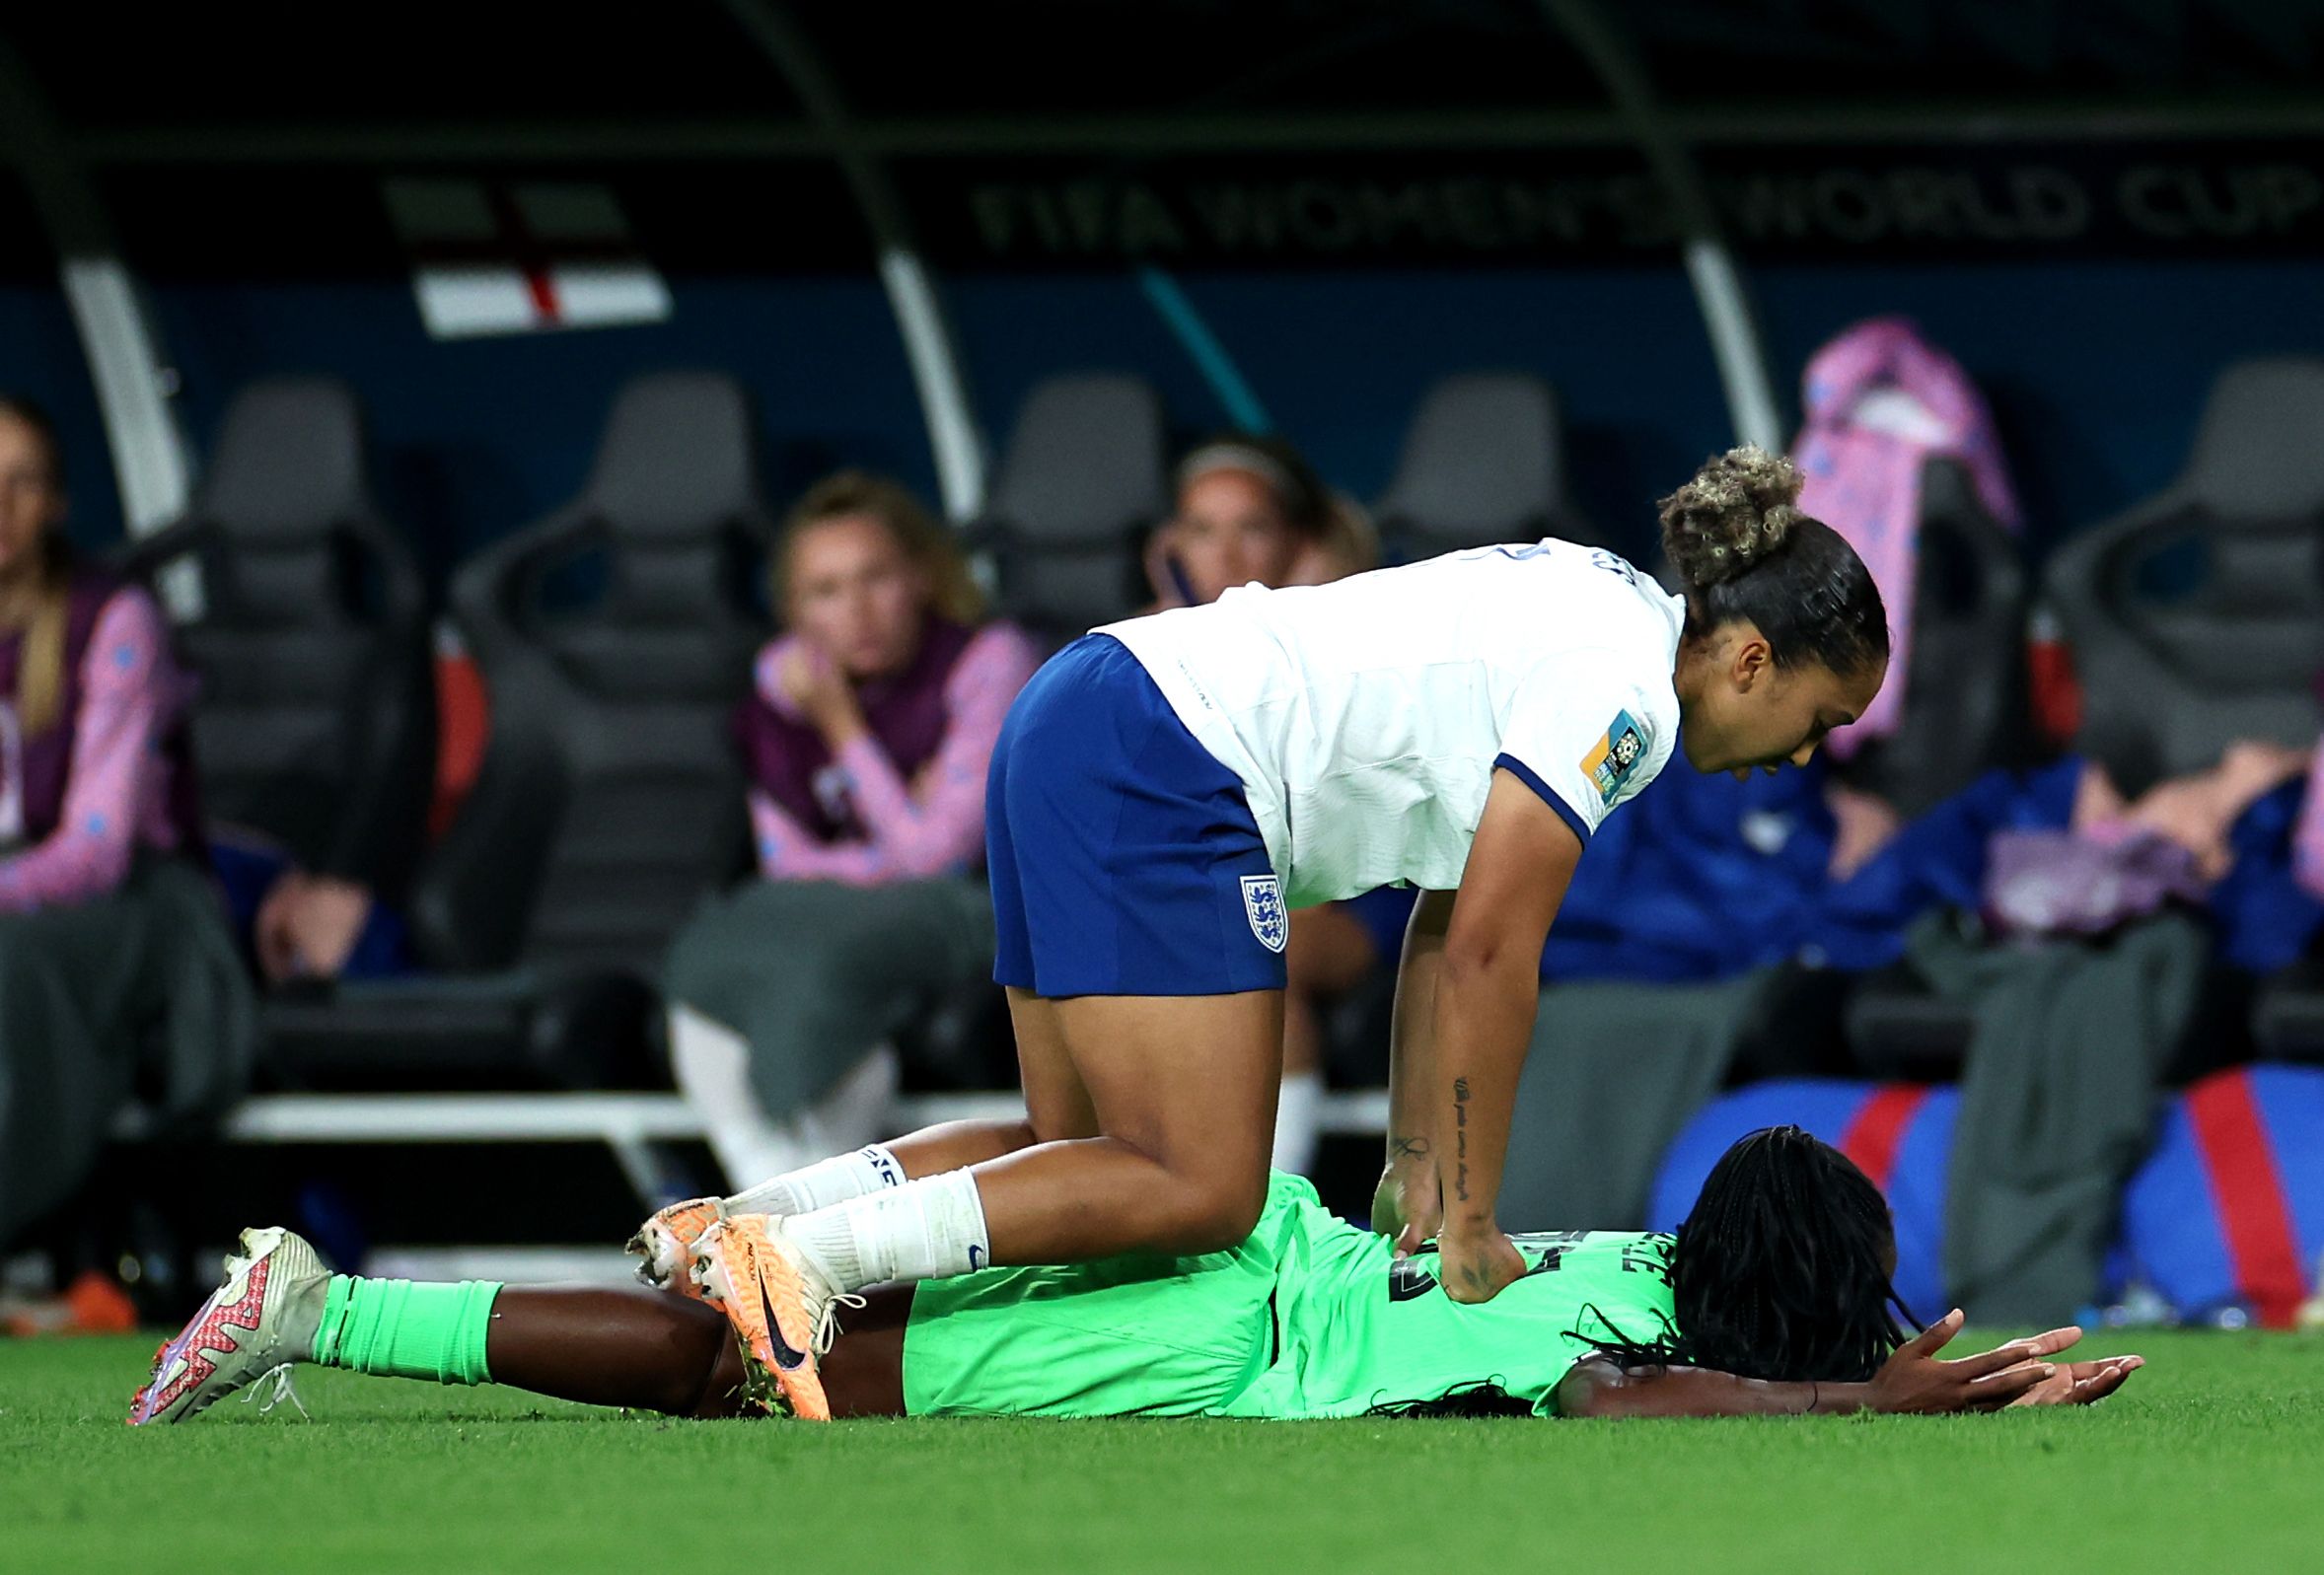 England advances over Nigeria on penalties despite James' red card at Women's World Cup